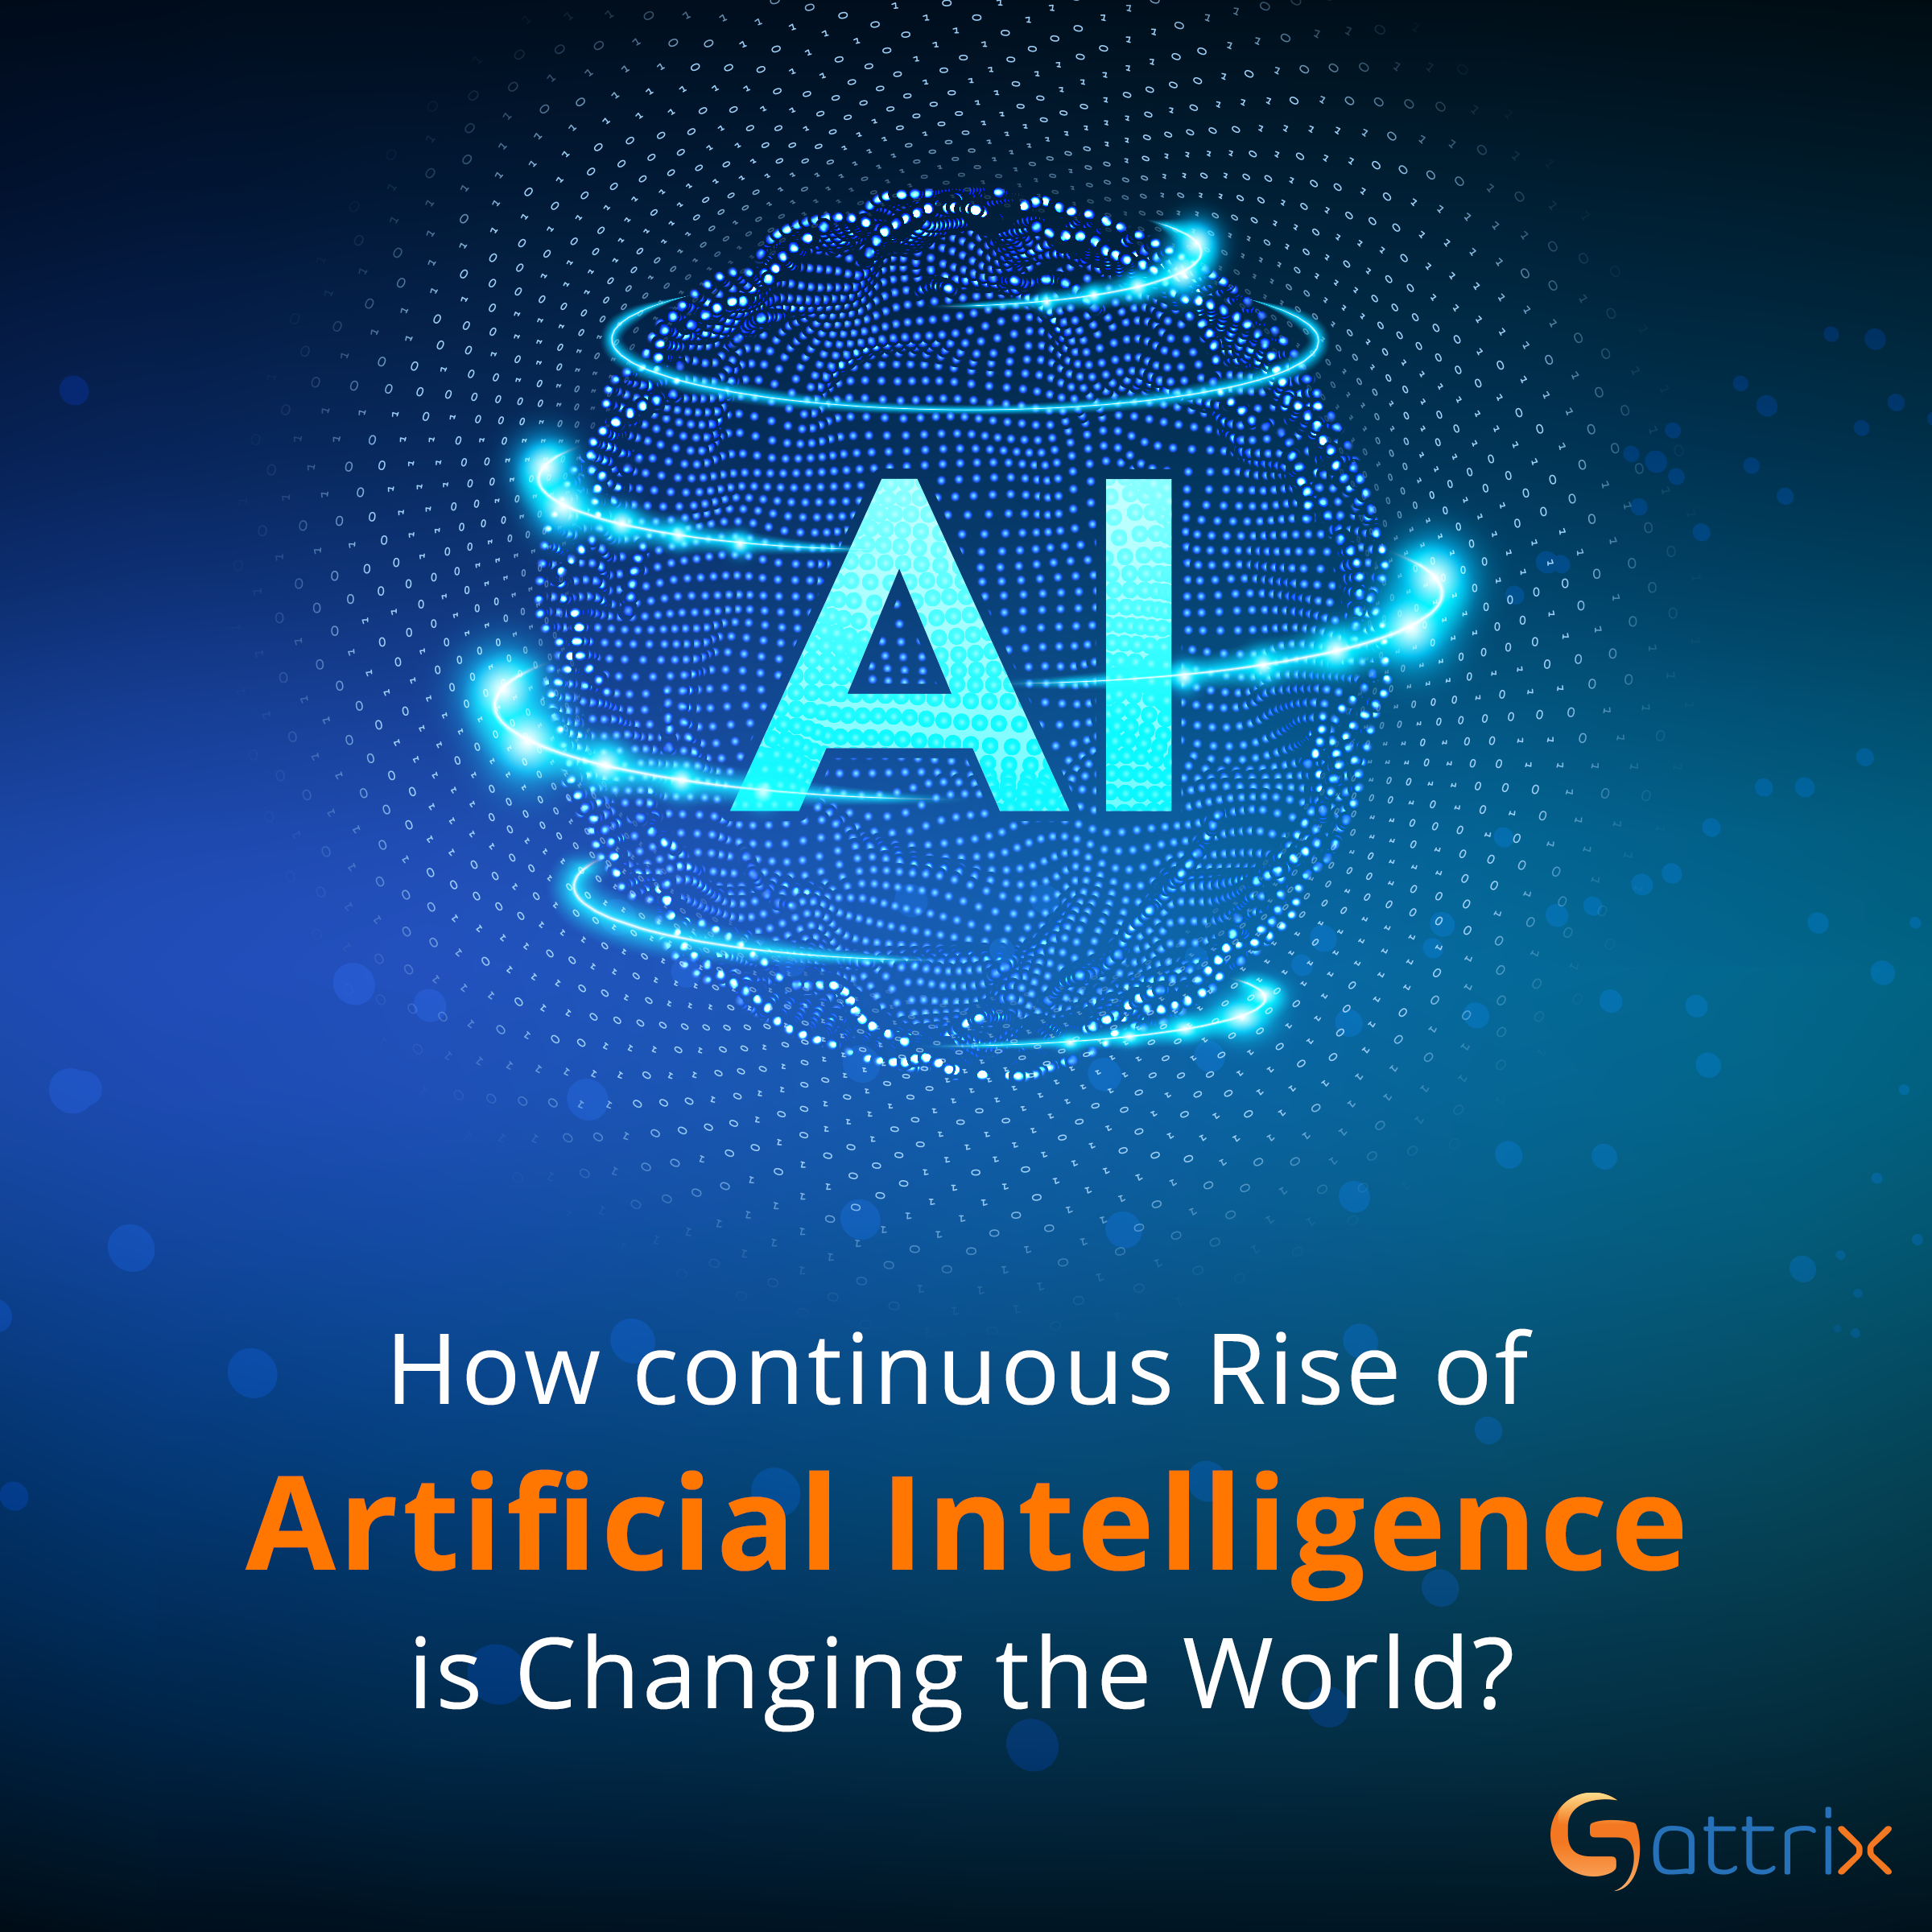 How continuous rise of Artificial Intelligence is changing the world?